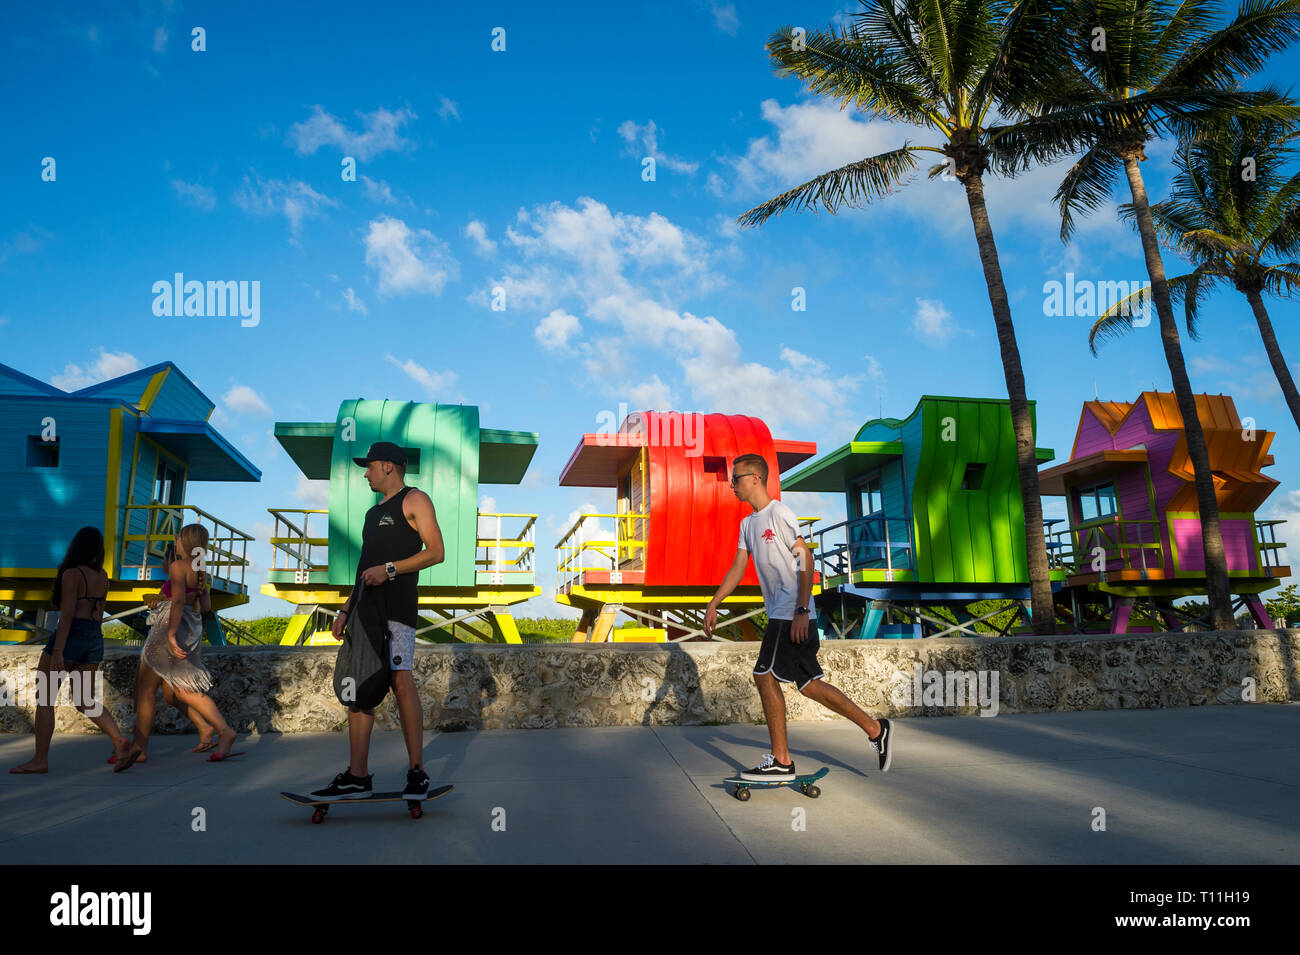 MIAMI - JULY 2017: Young men on skateboards pass along the Miami Beach promenade in front of vibrantly colored lifeguard towers in Lummus Park. Stock Photo